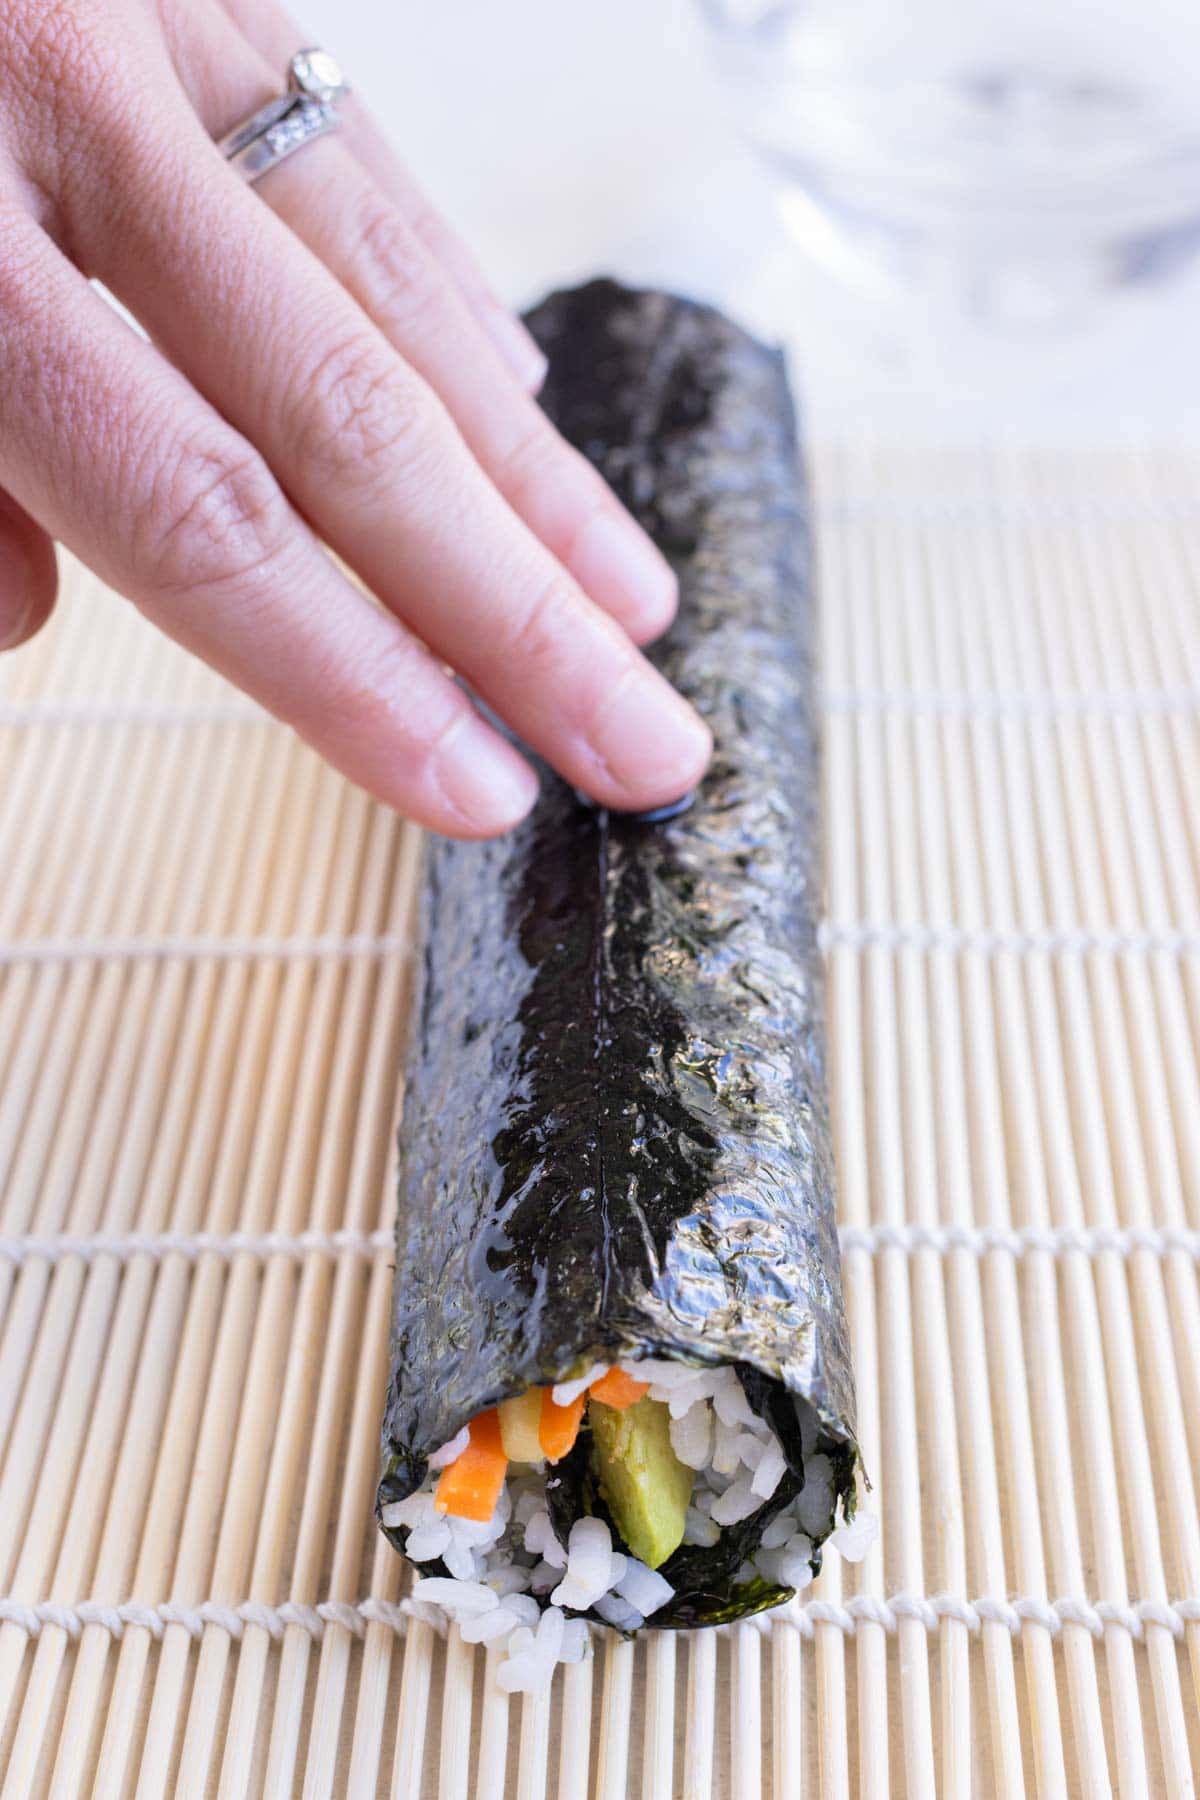 A hand is used to hold the sushi roll before cutting it.